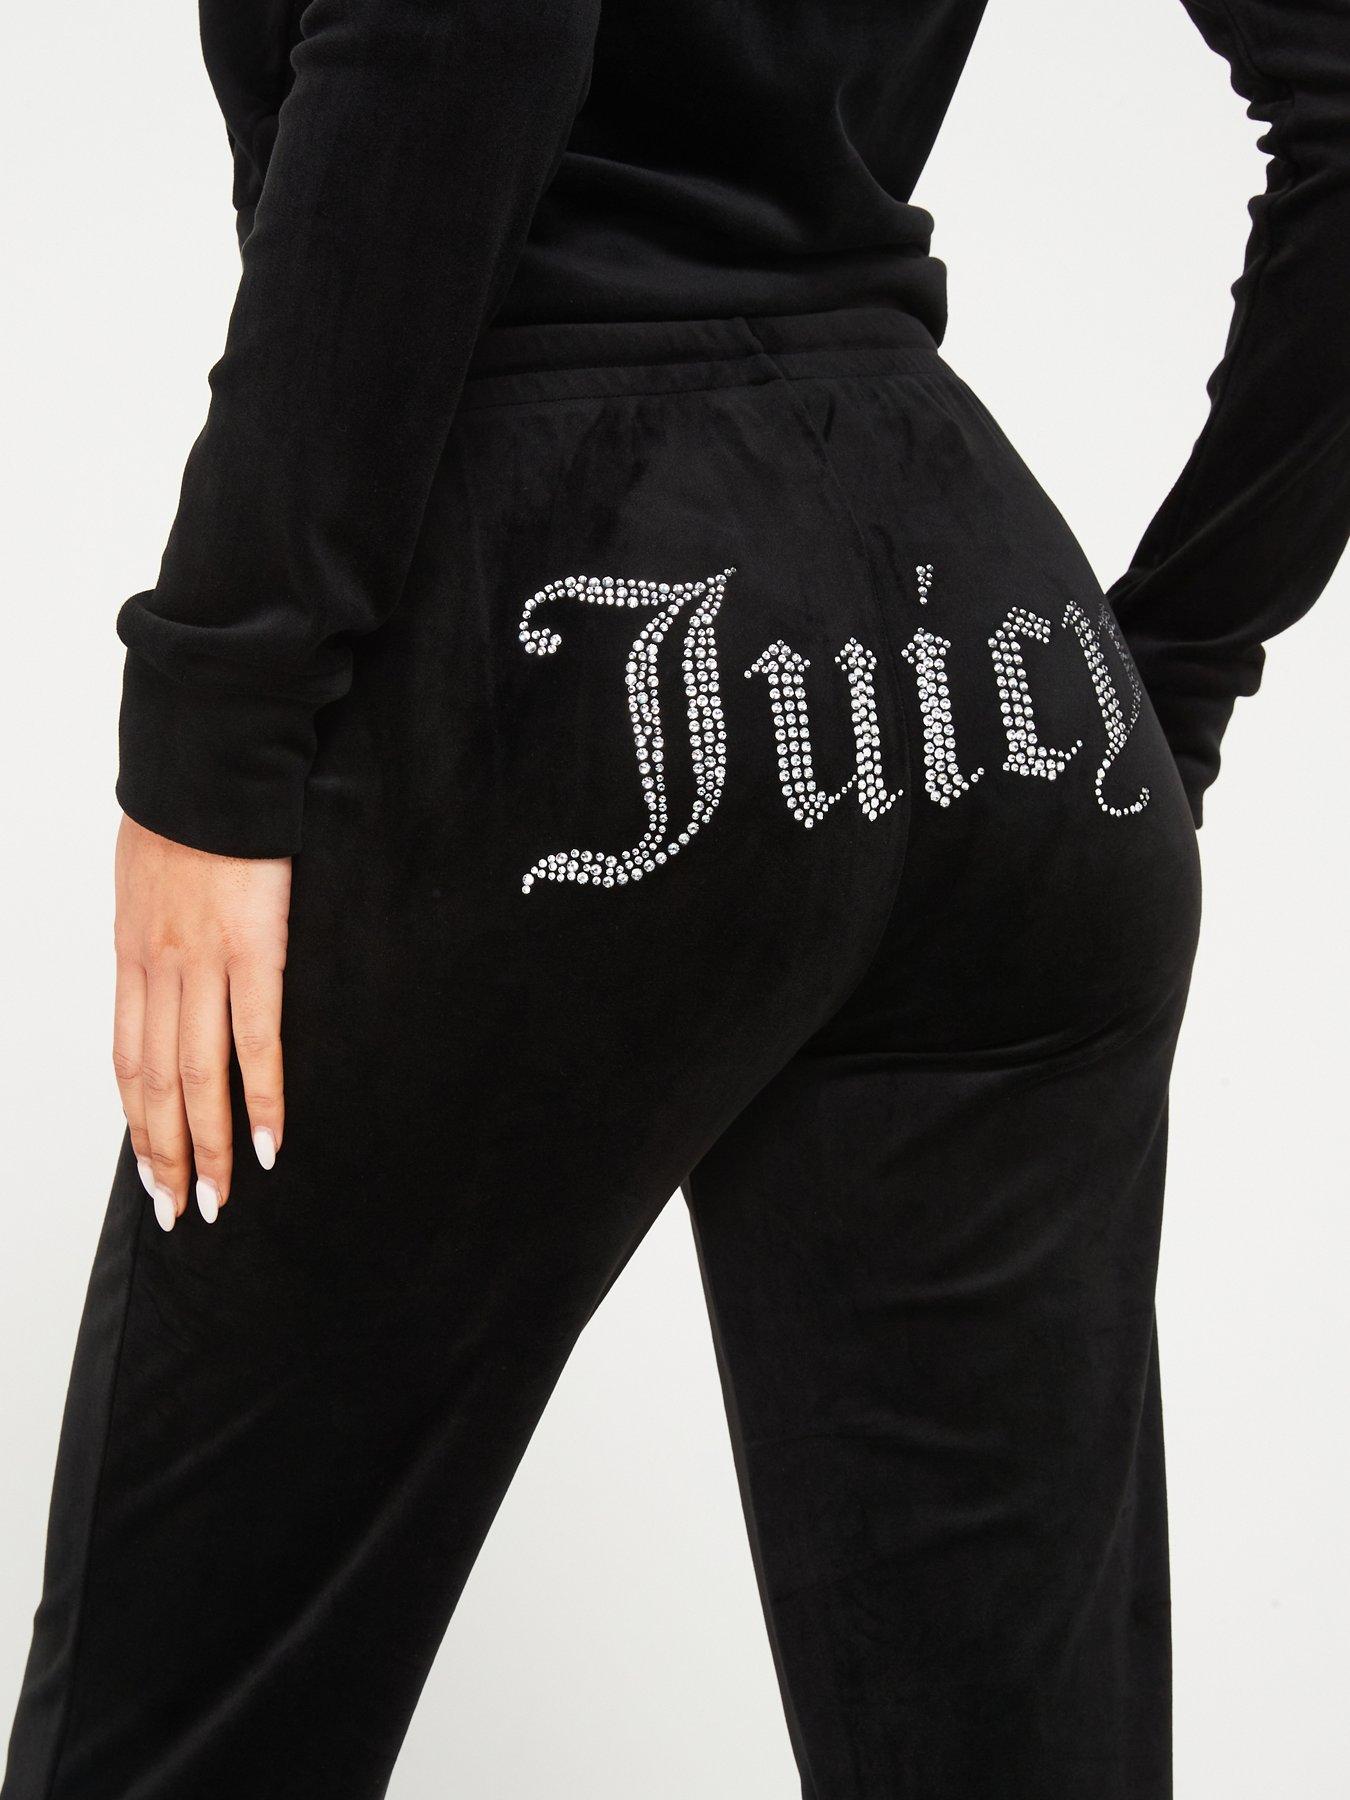 Juicy By Juicy Couture Pajama Pants Girls 4 Pink Embossed Logo Pull On  Stretch